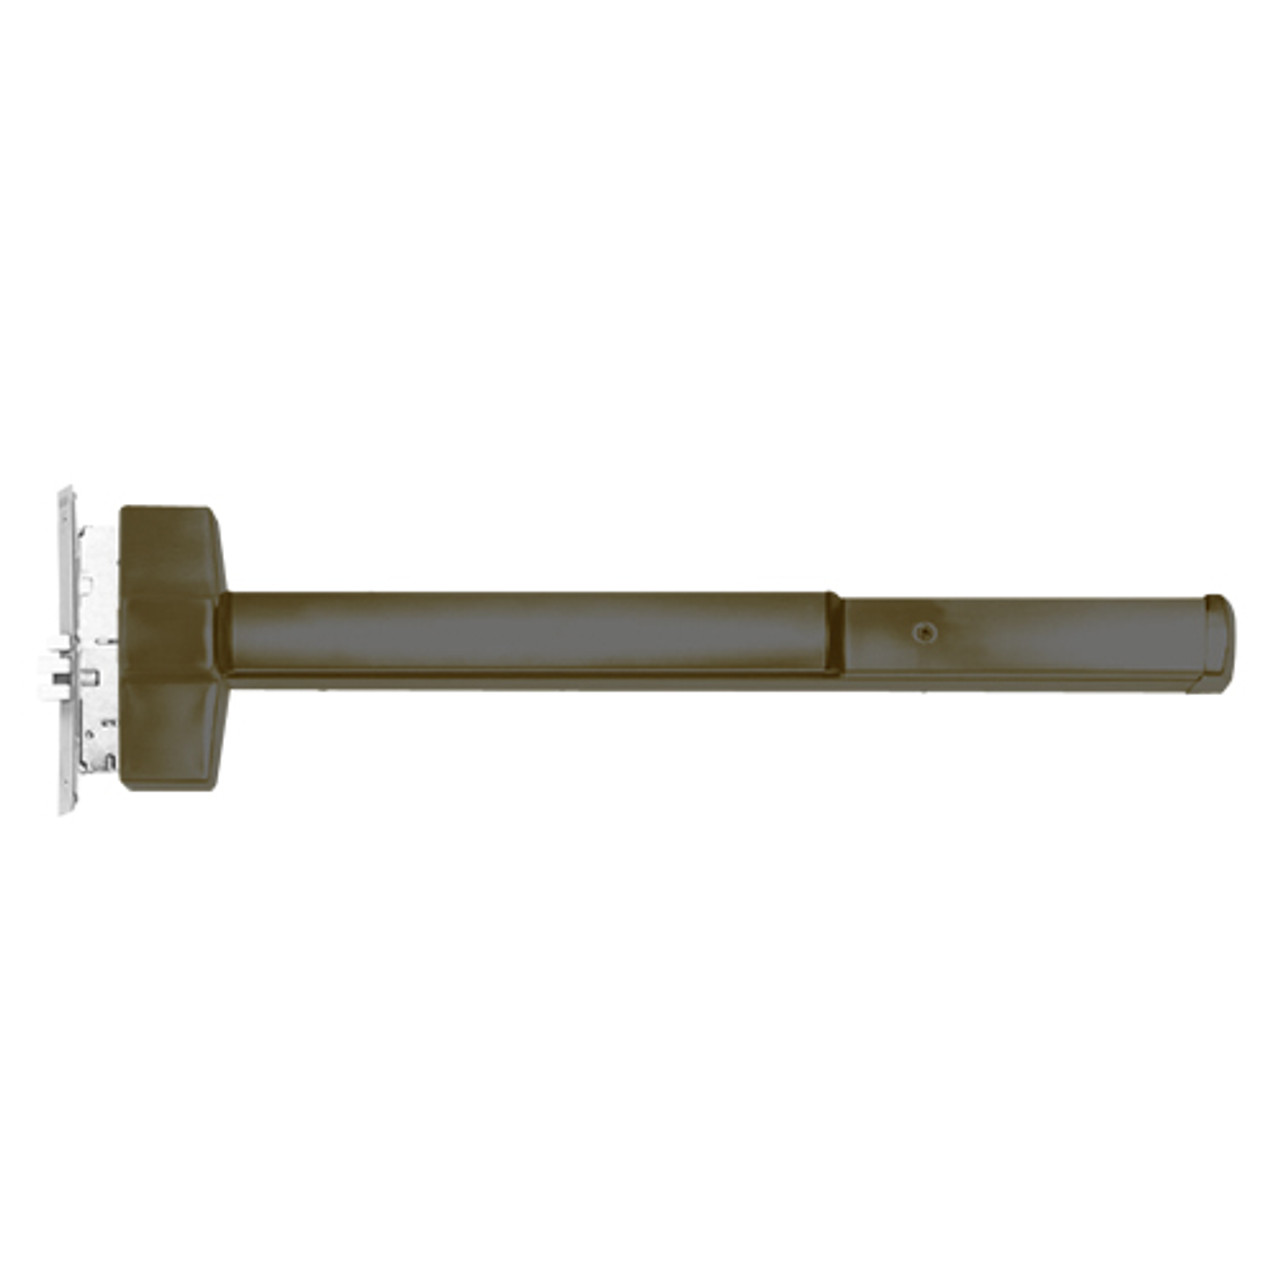 ED5657L-613-MELR-M92-LHR Corbin ED5600 Series Non Fire Rated Mortise Exit Device with Motorized Latch Retraction and Touchbar Monitoring in Oil Rubbed Bronze Finish